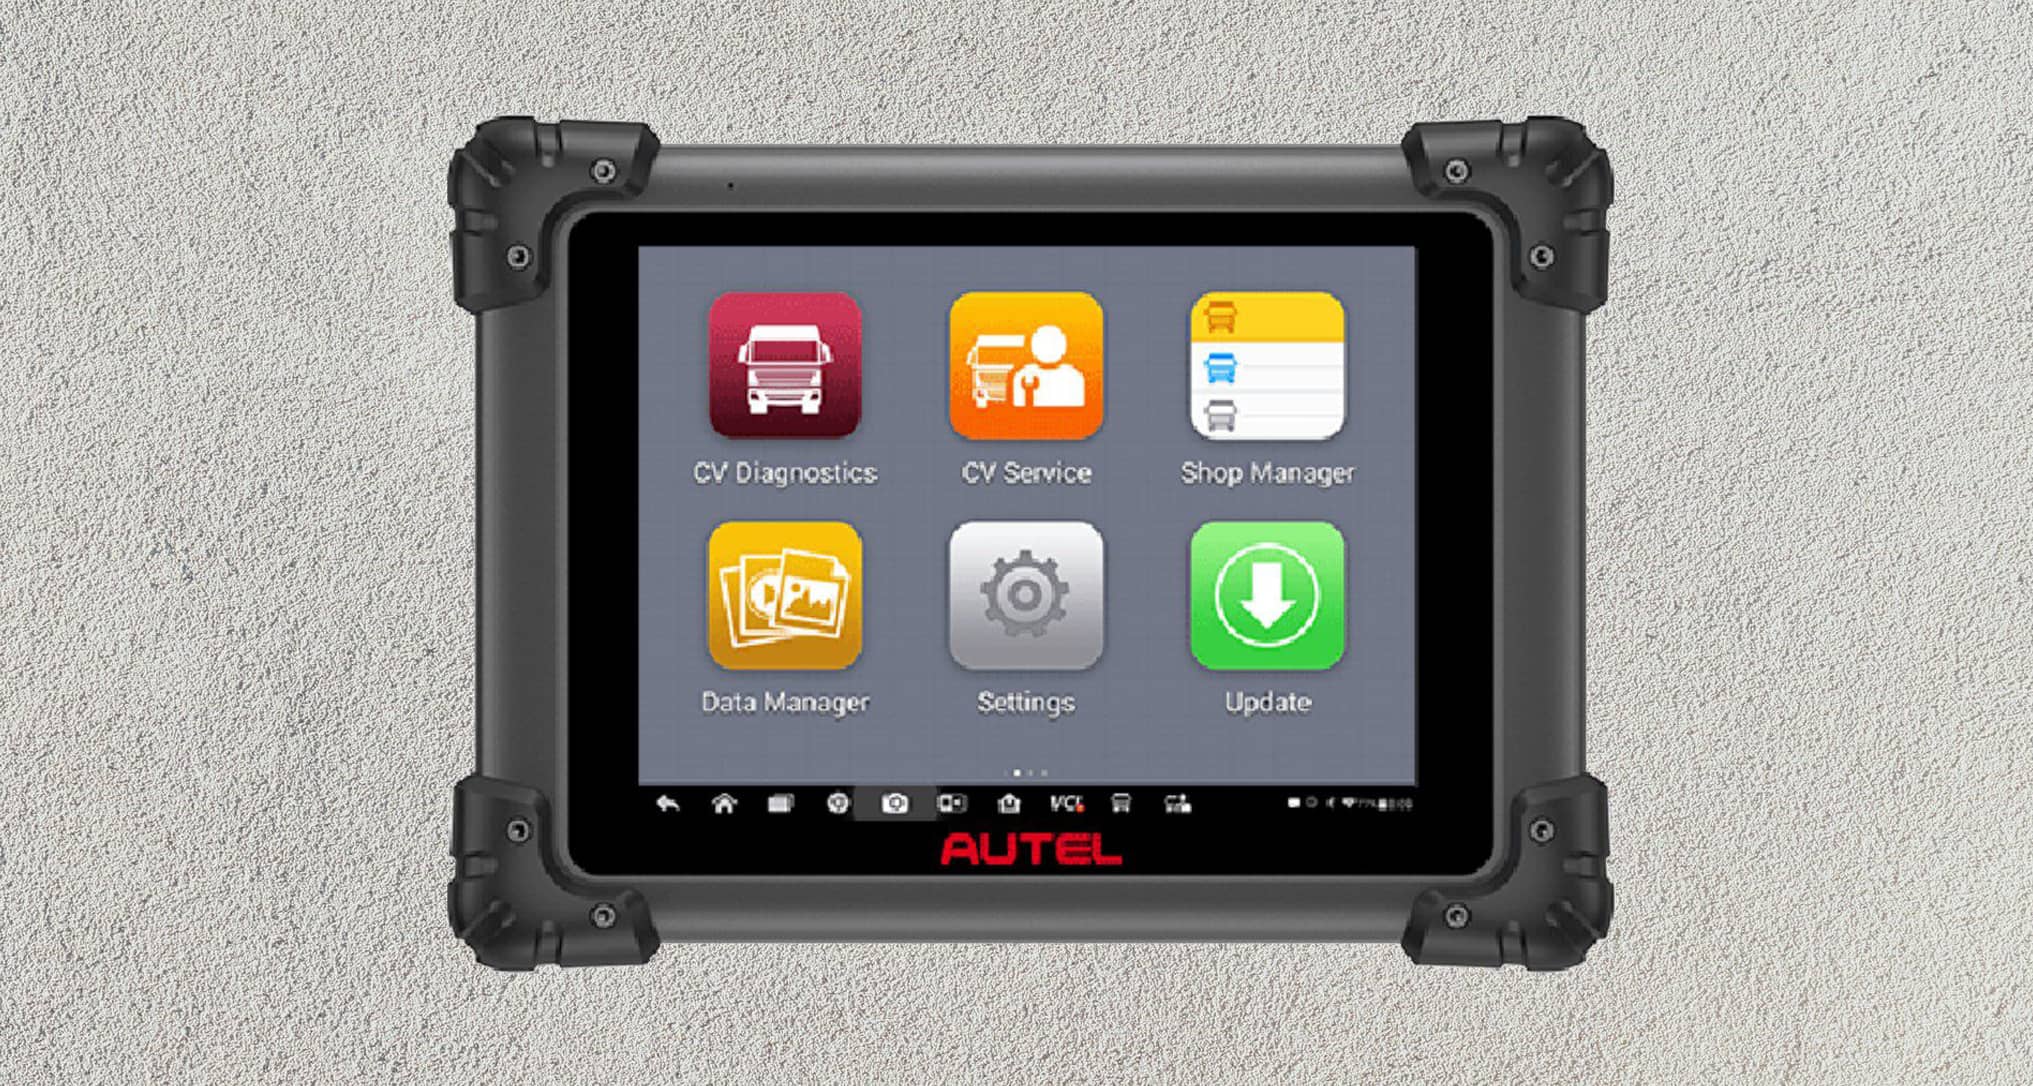 Autel MaxiSYS MS908CV on a tablet over a grey background